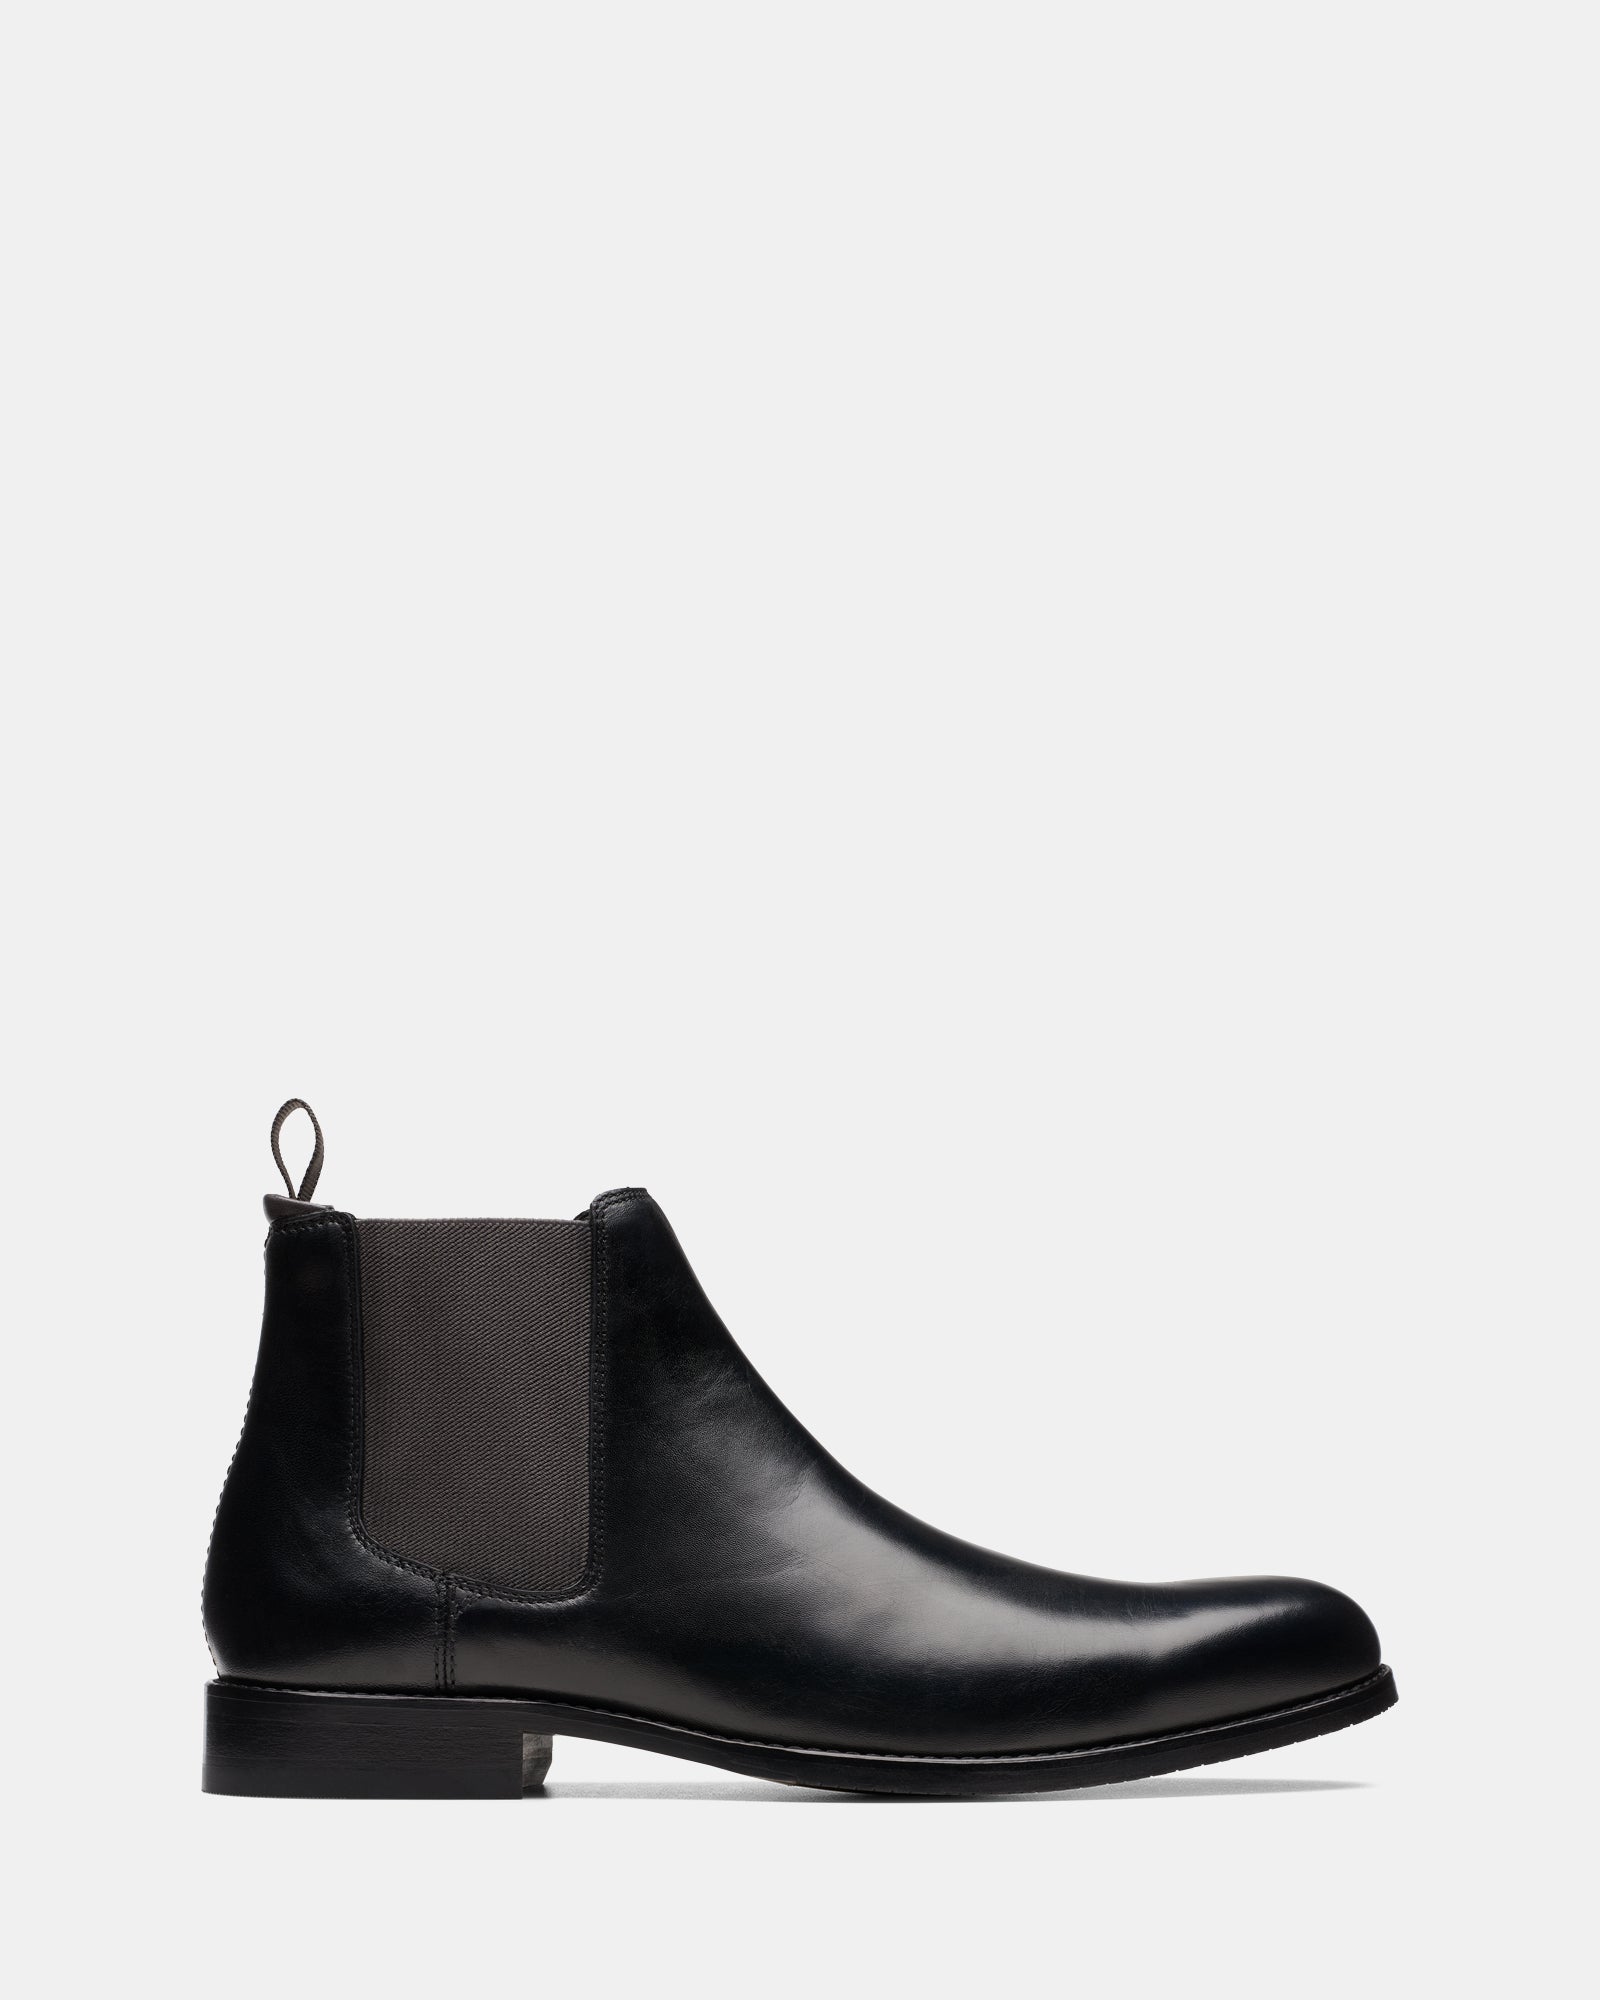 Craftarlo Top Black Leather – Clarks